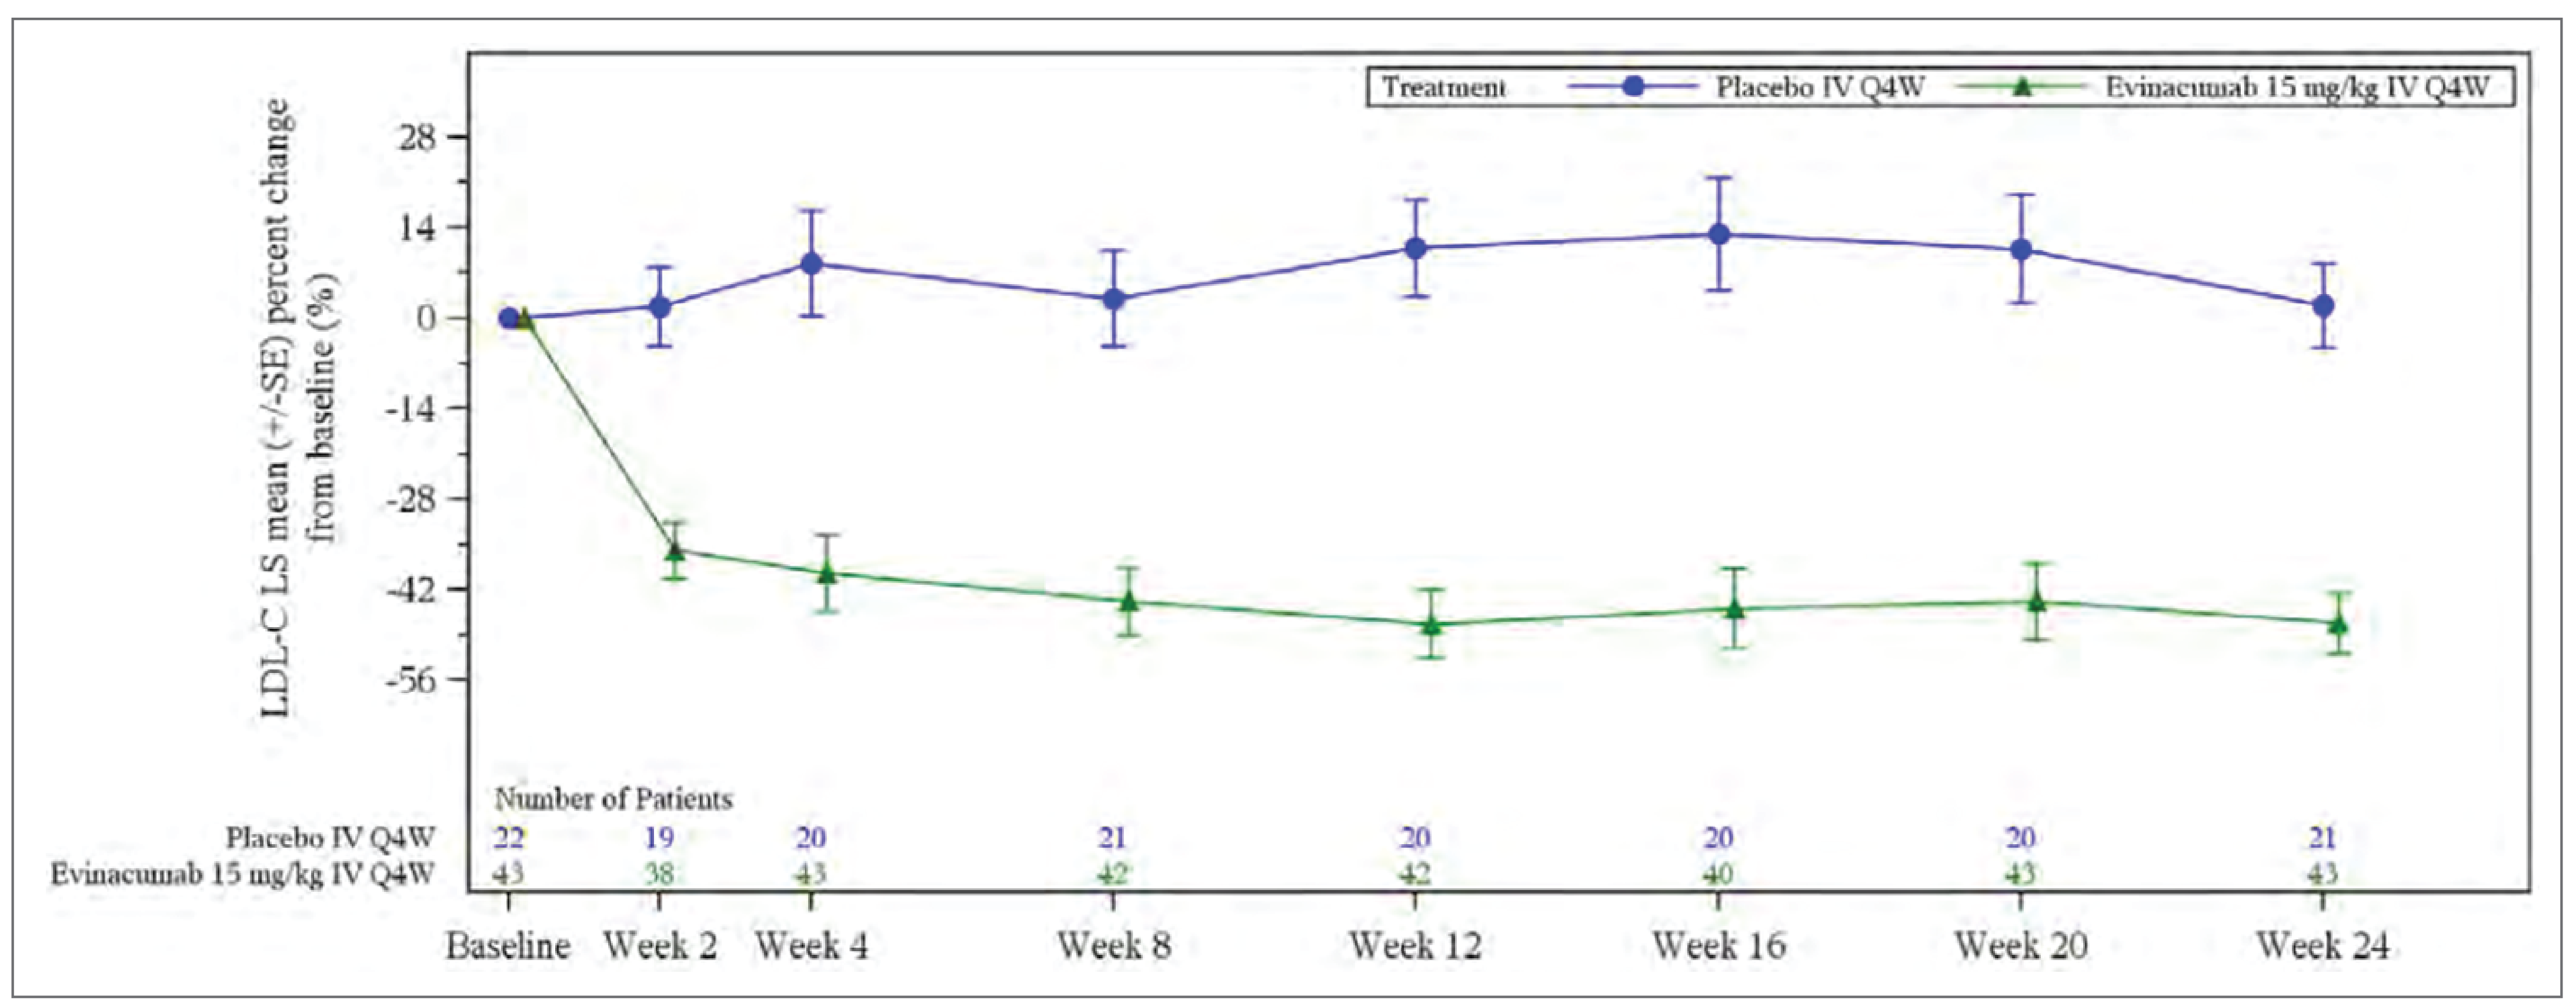 Plot of LSM percent change in LDL-C over time with evinacumab and placebo. A sharp decrease in LDL-C levels to below 40% is seen at week 2 with evinacumab, which is sustained until the end of the treatment period (24 weeks), while baseline LDL-C levels remain consistent throughout the treatment period with placebo.